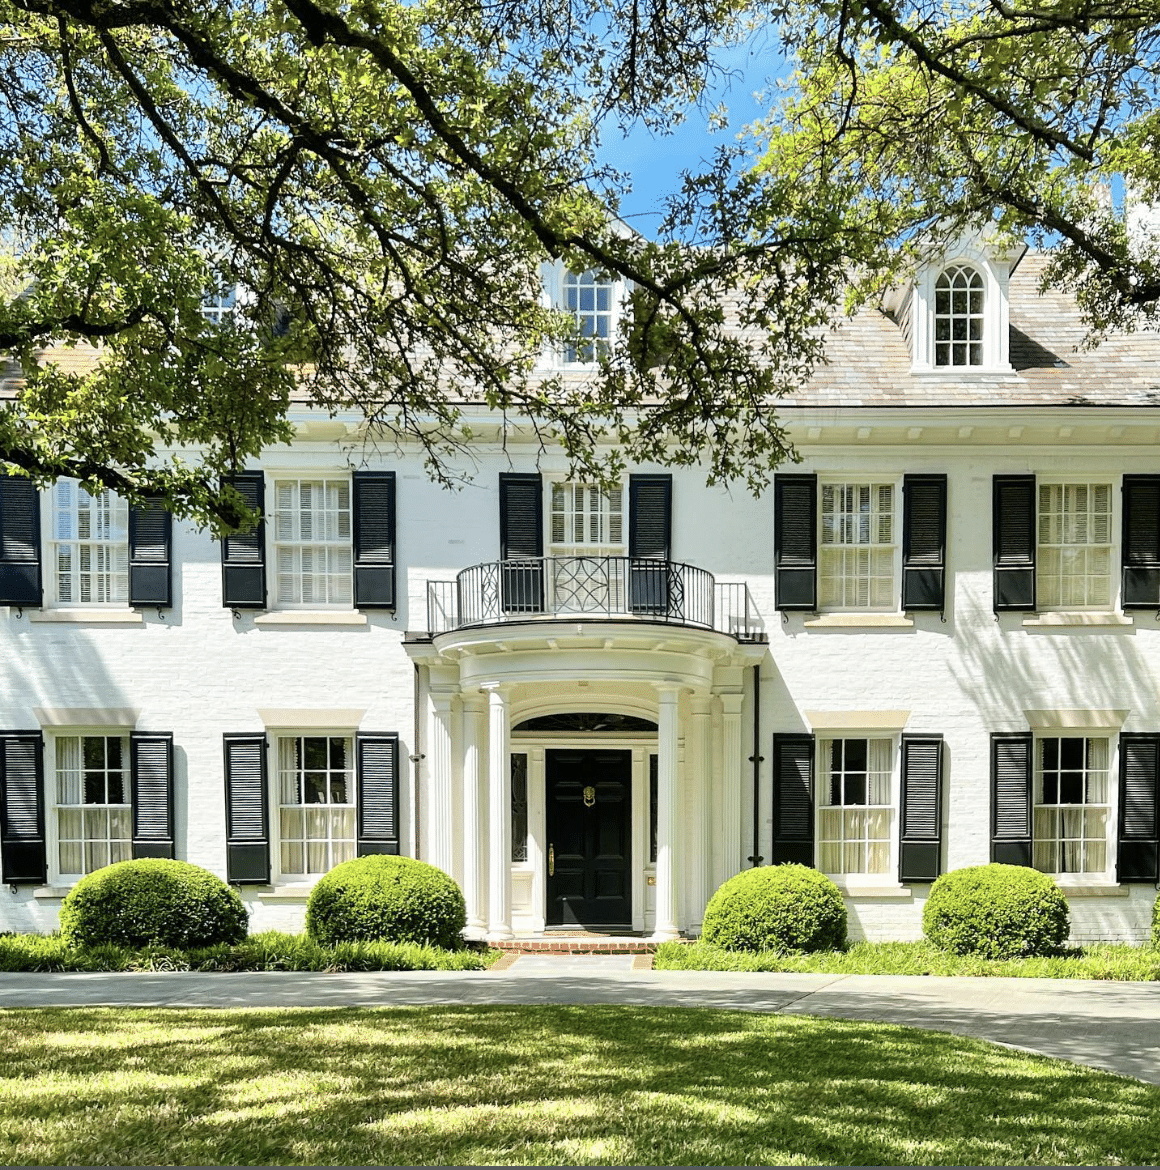 Curb Appeal - The Potted Boxwood Photography - white house - white brick house - breathtaking